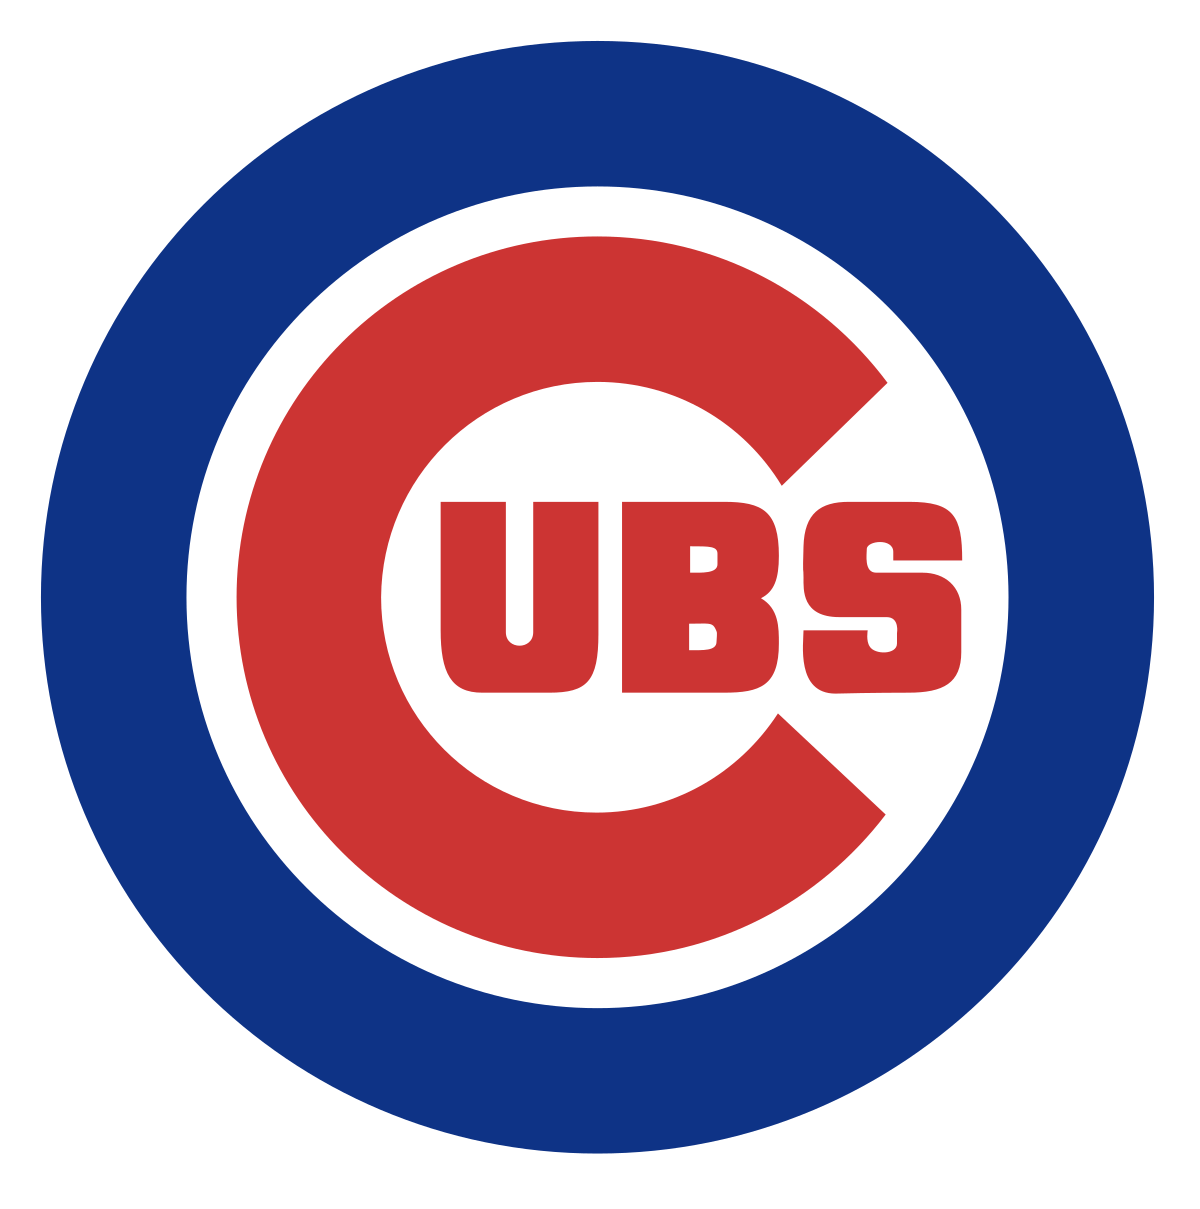 Red White and Blue Sports Team Logo - Chicago Cubs